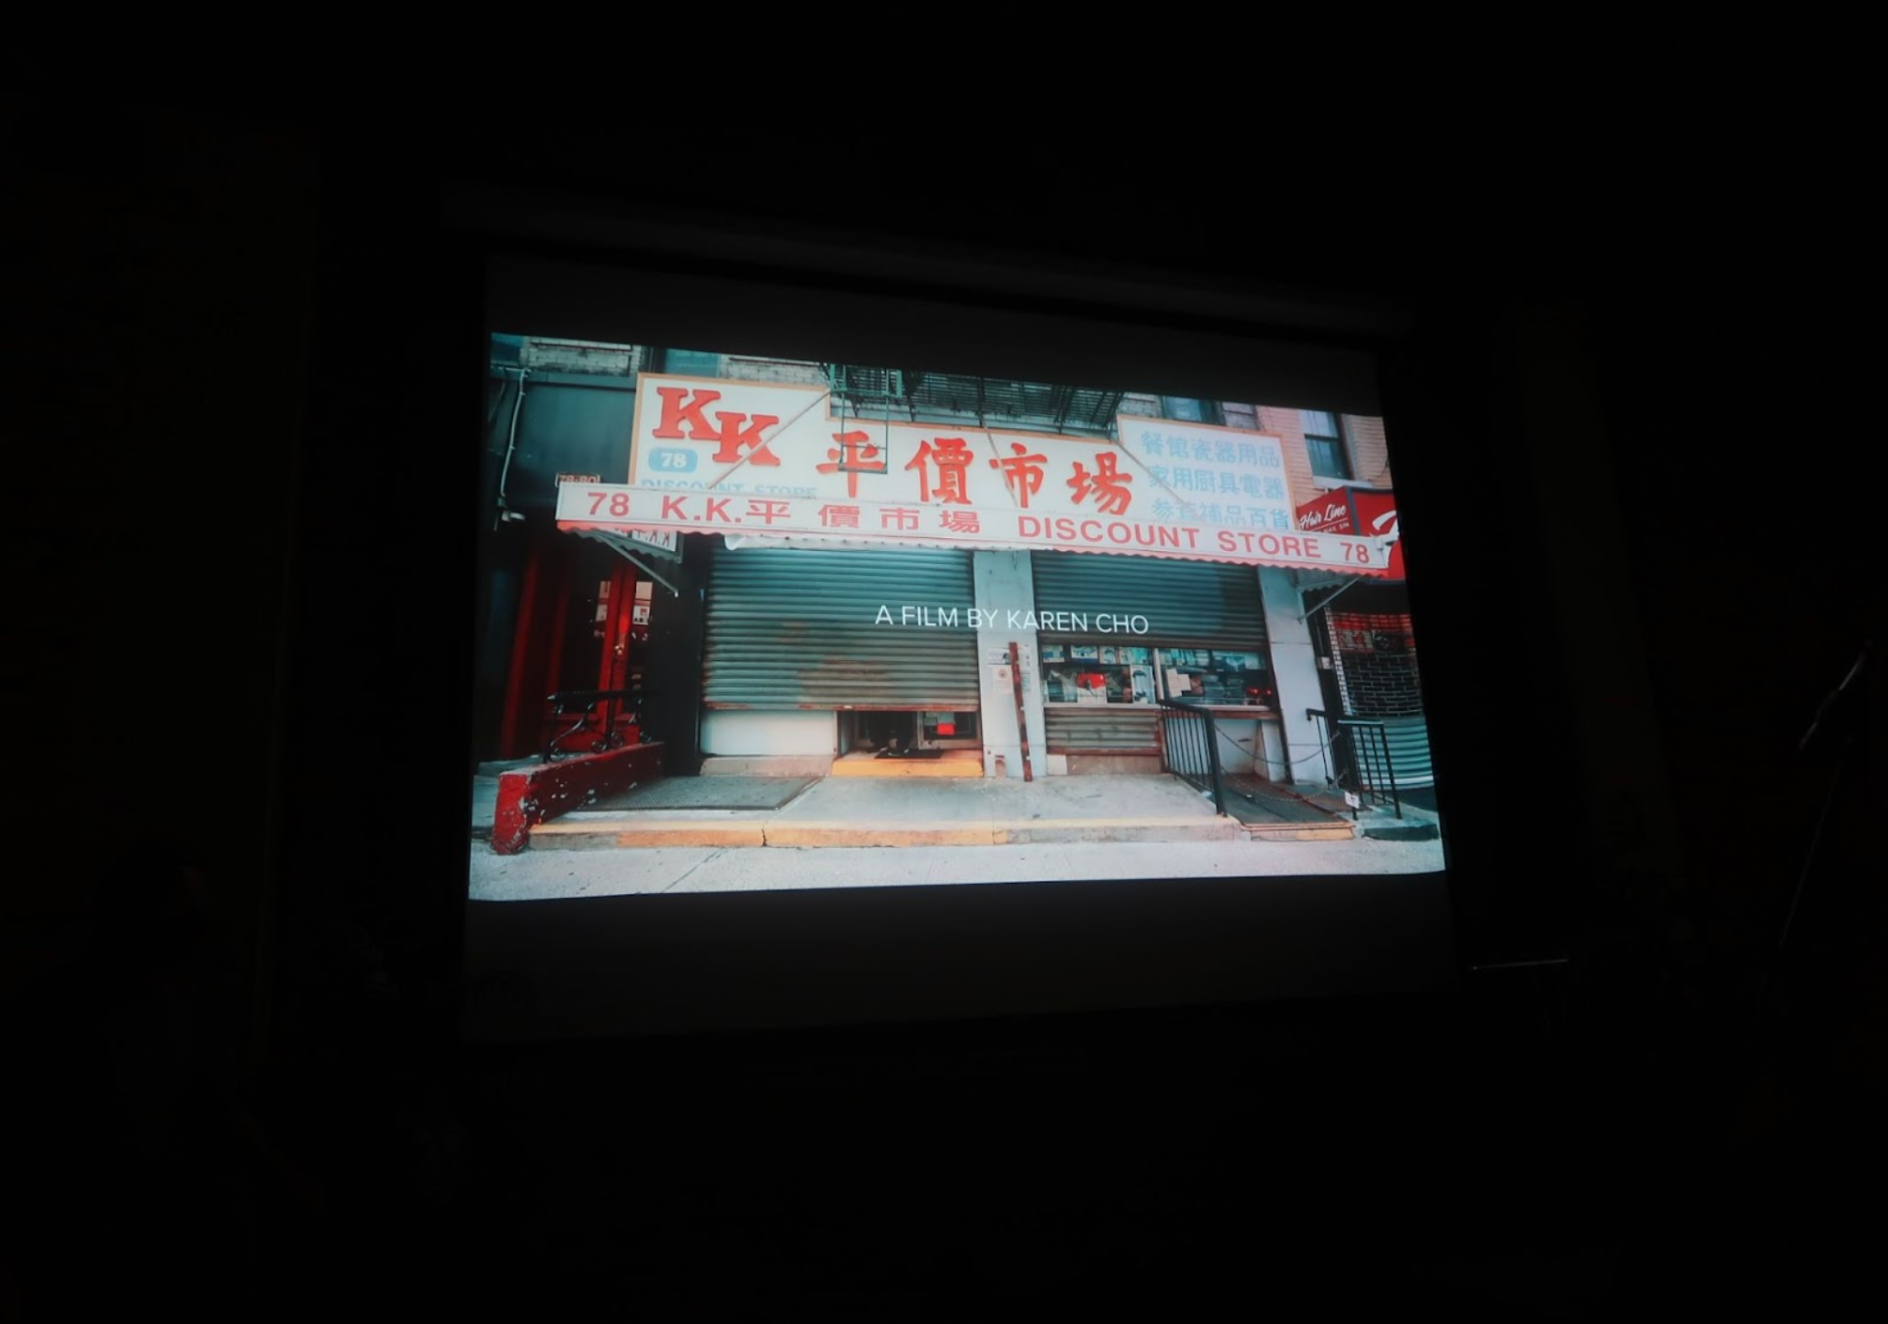 Big+Fight+in+Little+Chinatown%3A+Explore+the+Heart+of+Chinatown+through+the+Documentary